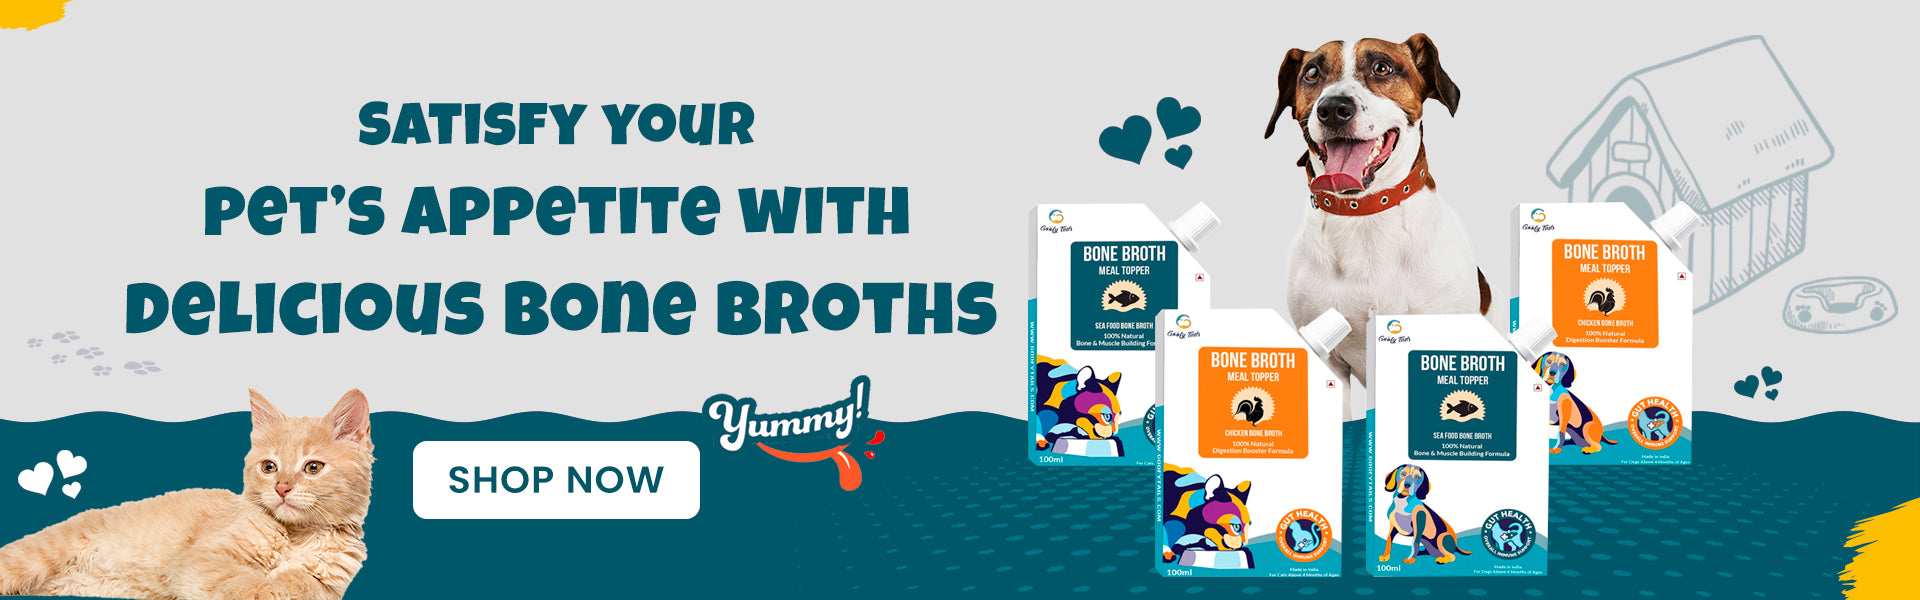 Bone Broth for Dogs and cats desktop banner from goofytails.com